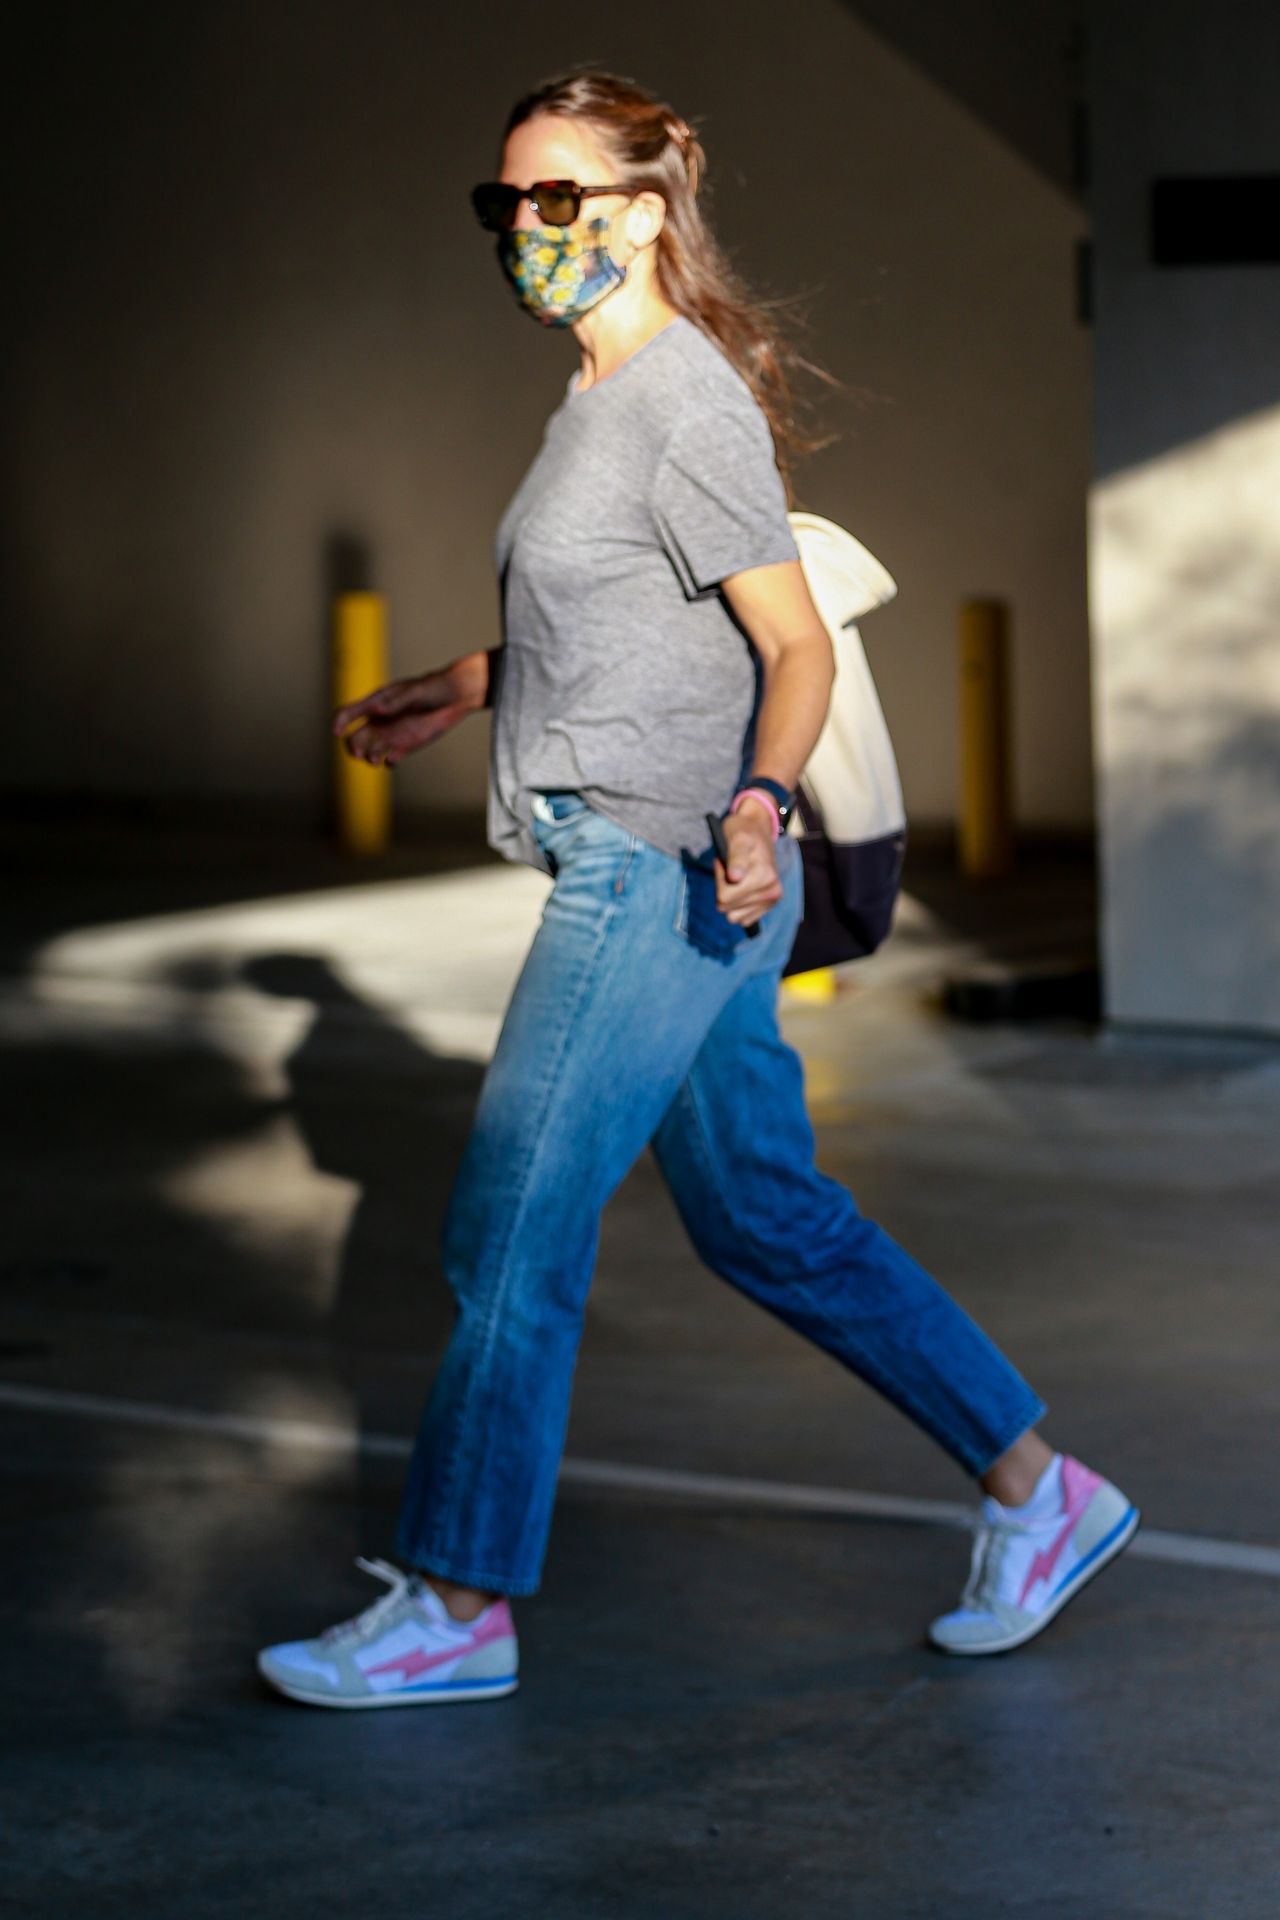 jennifer-garner-in-casual-outfit-visits-a-spa-in-brentwood-08-31-2020-2.jpg